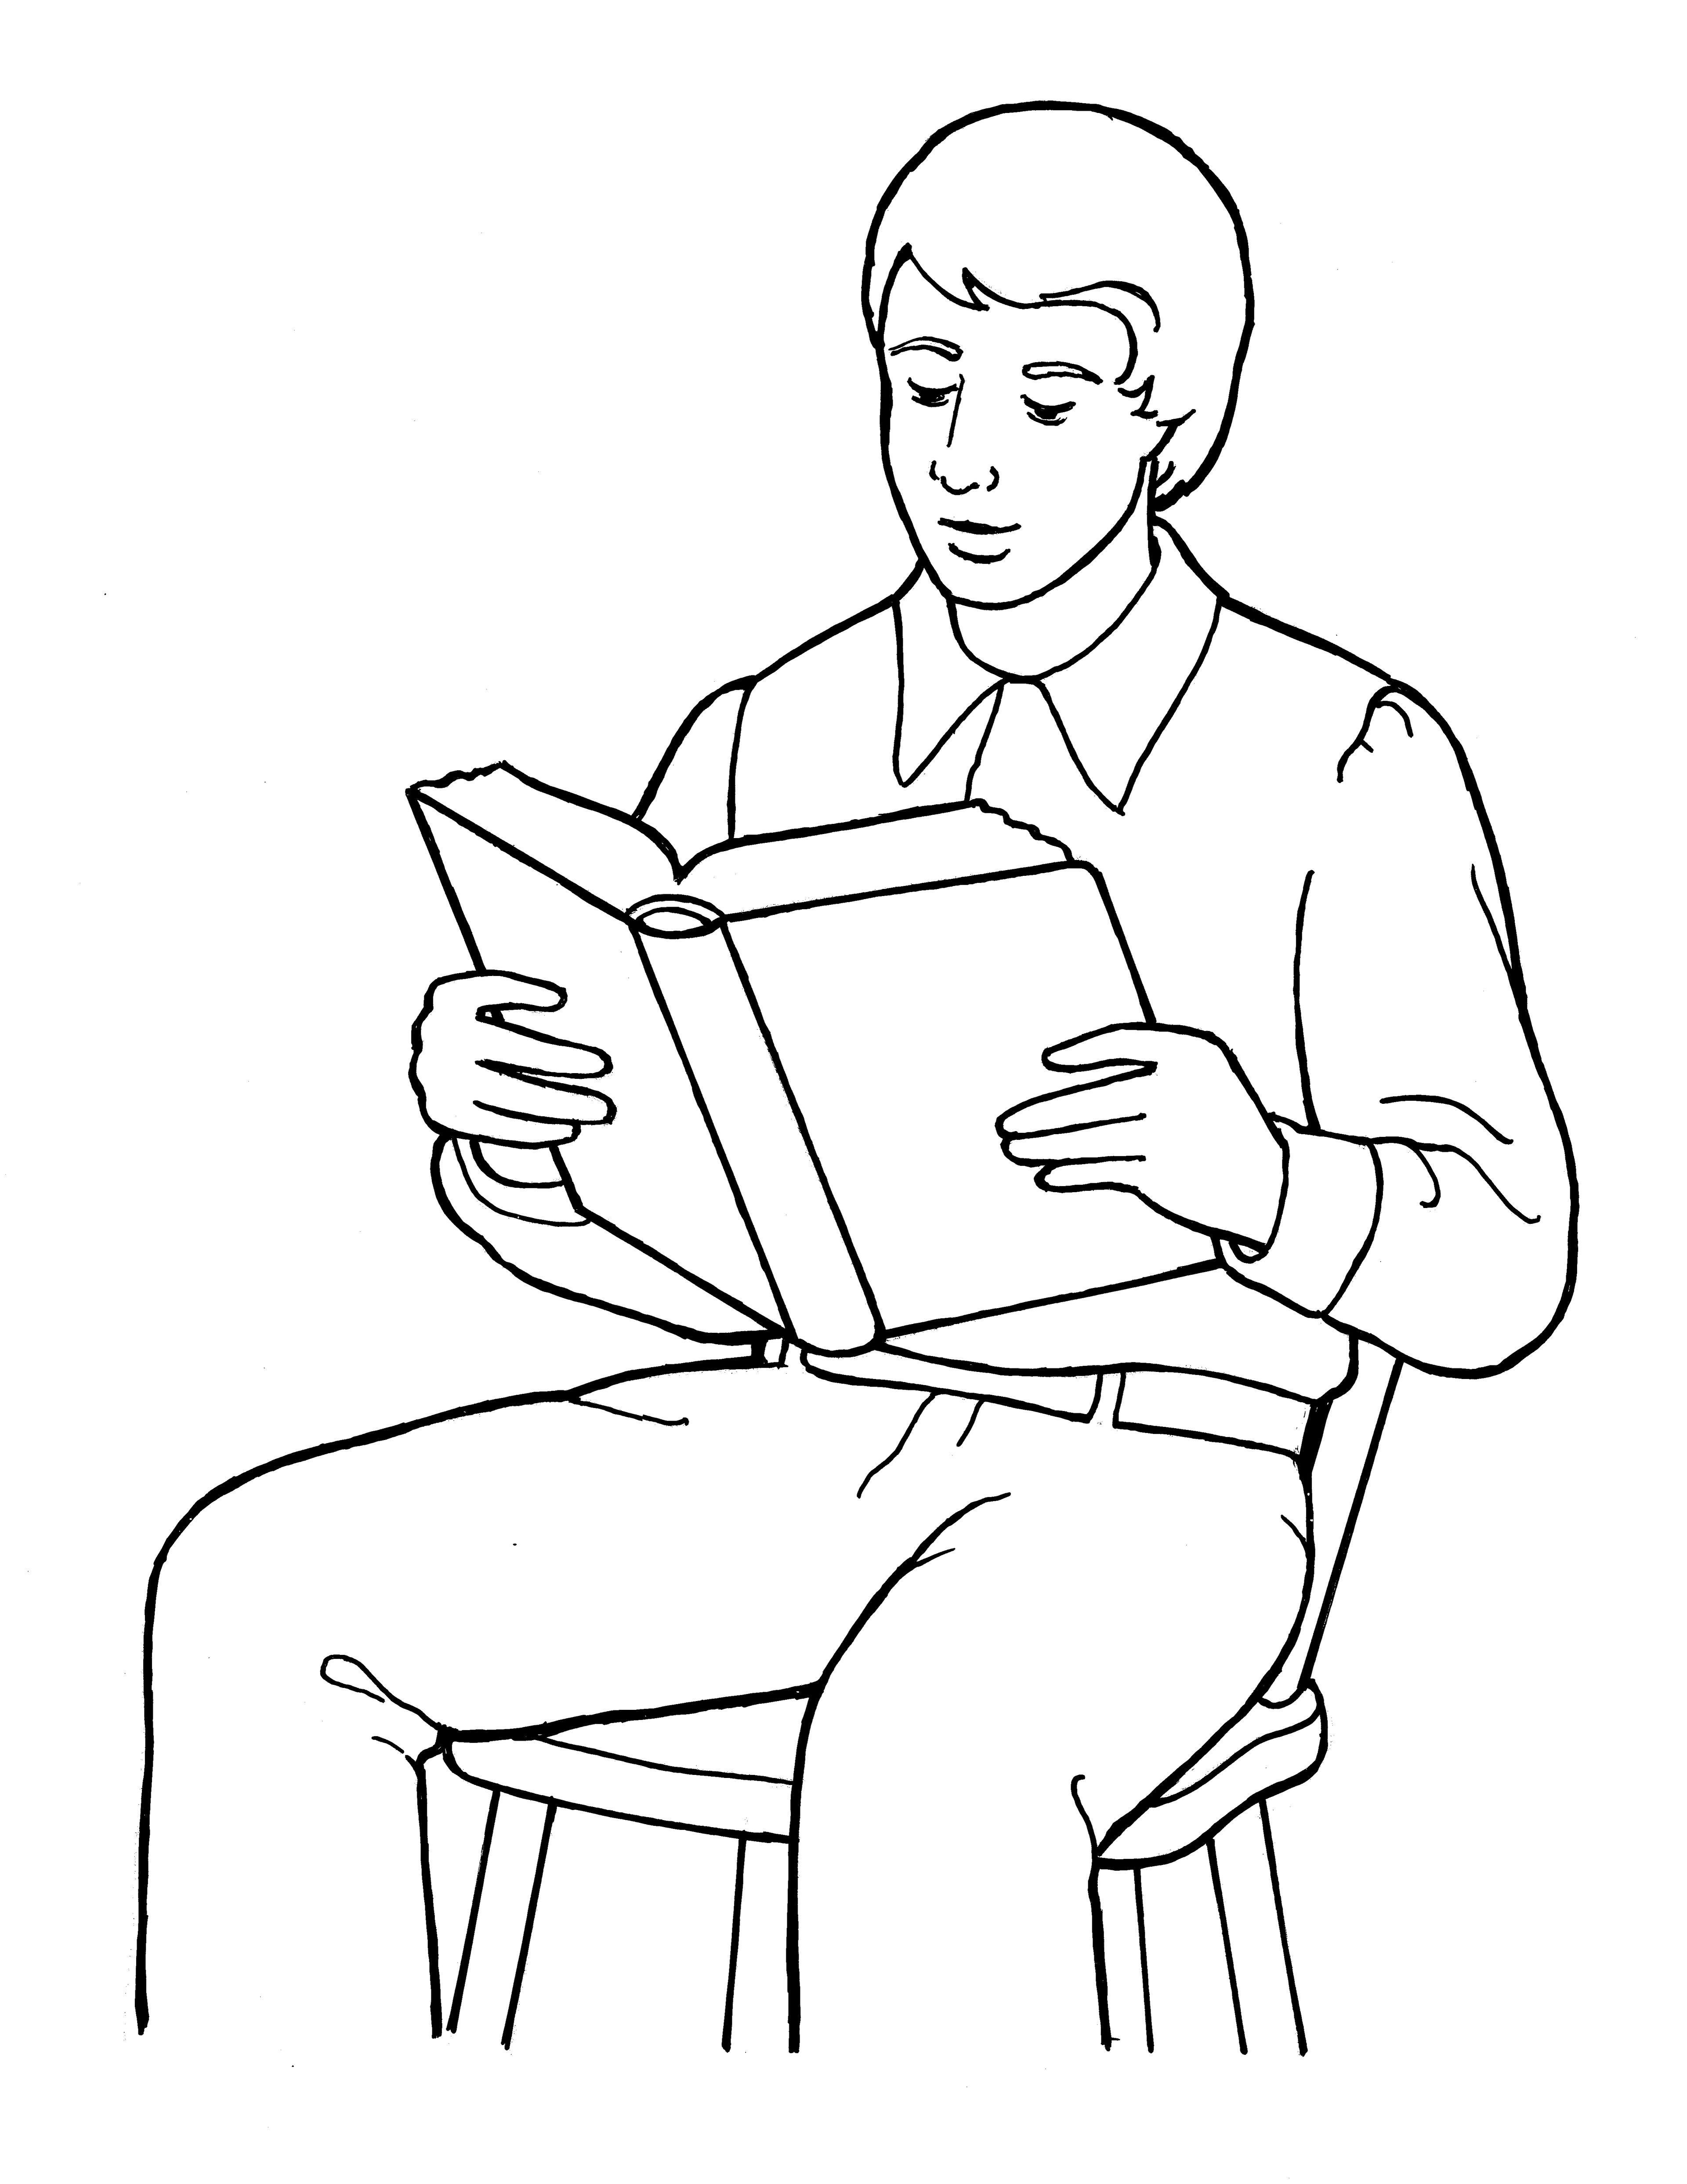 An illustration of a young Joseph Smith reading the scriptures, from the nursery manual Behold Your Little Ones (2008), page 103.